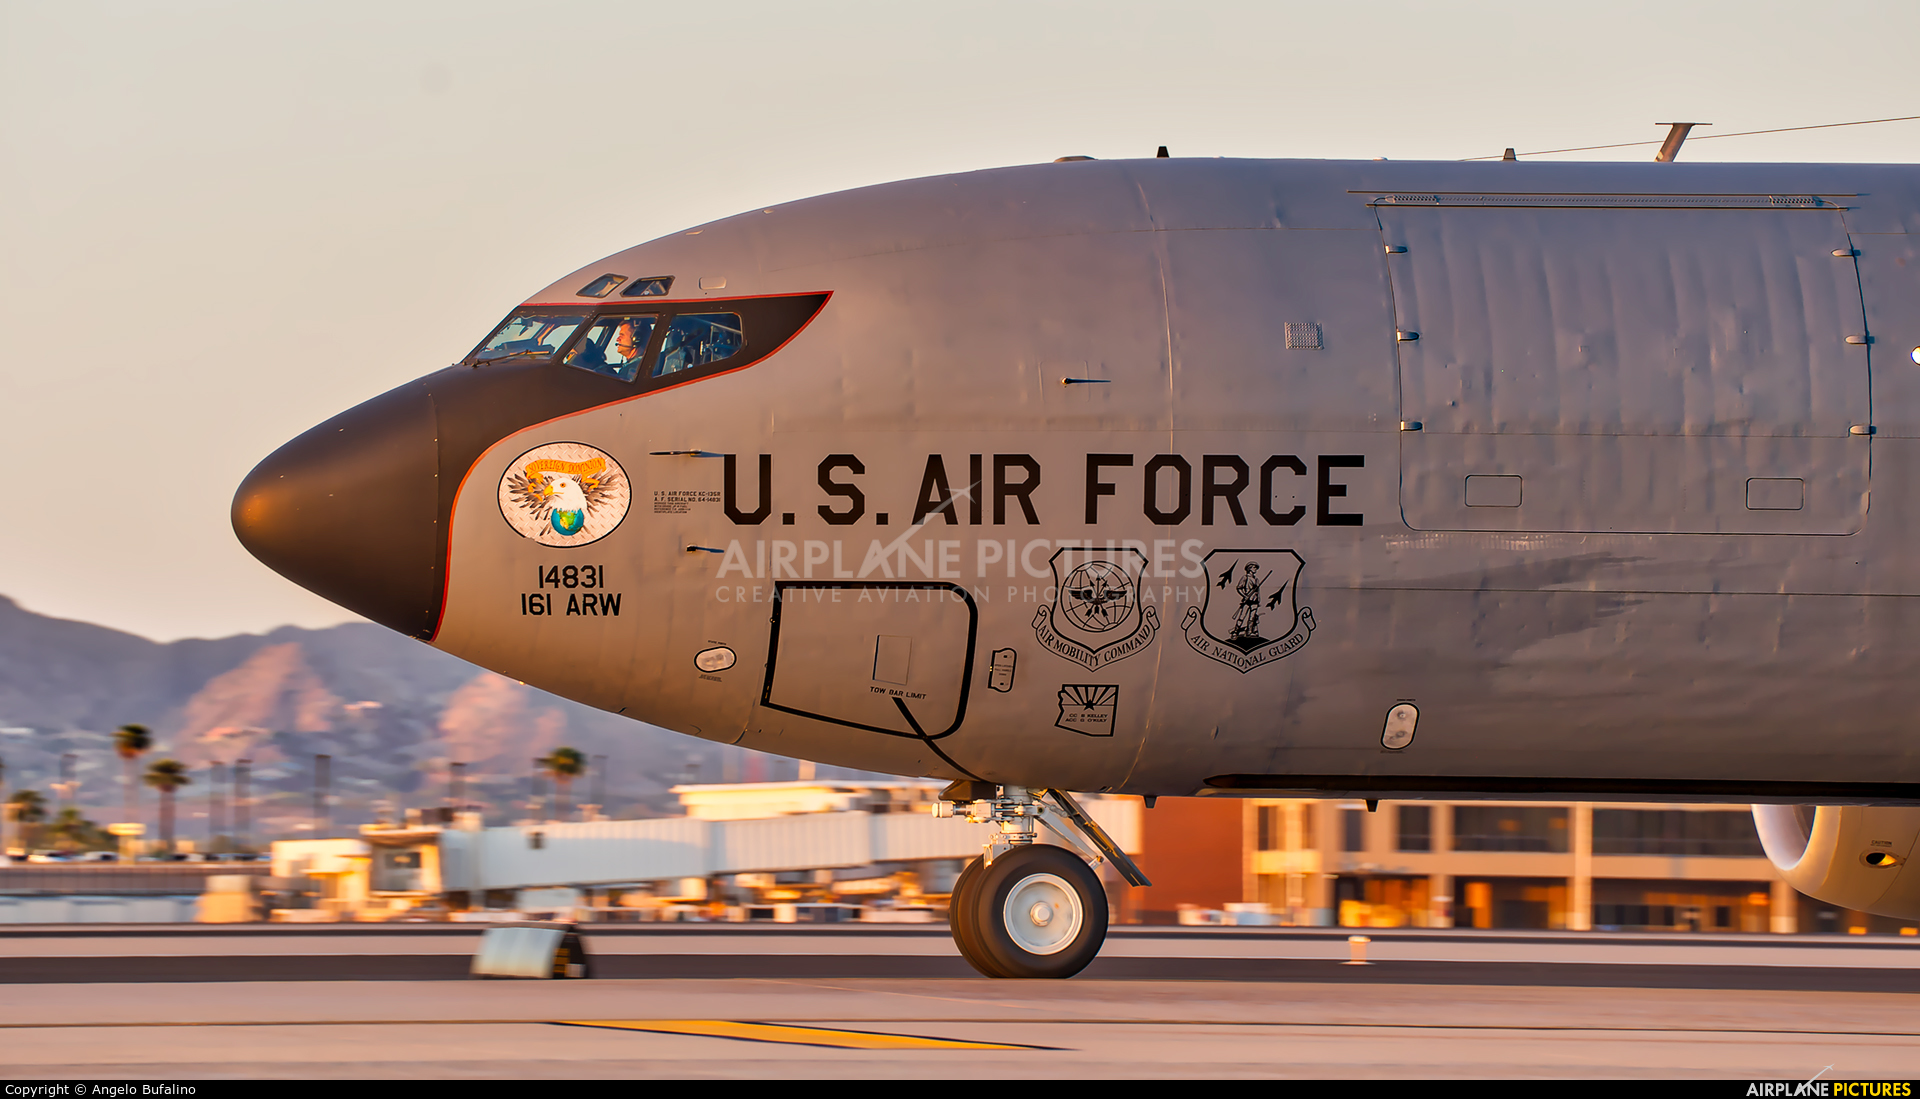 64-14831 - USA - Air National Guard Boeing KC-135R Stratotanker at Phoenix  - Sky Harbor Intl | Photo ID 974478 | Airplane-Pictures.net